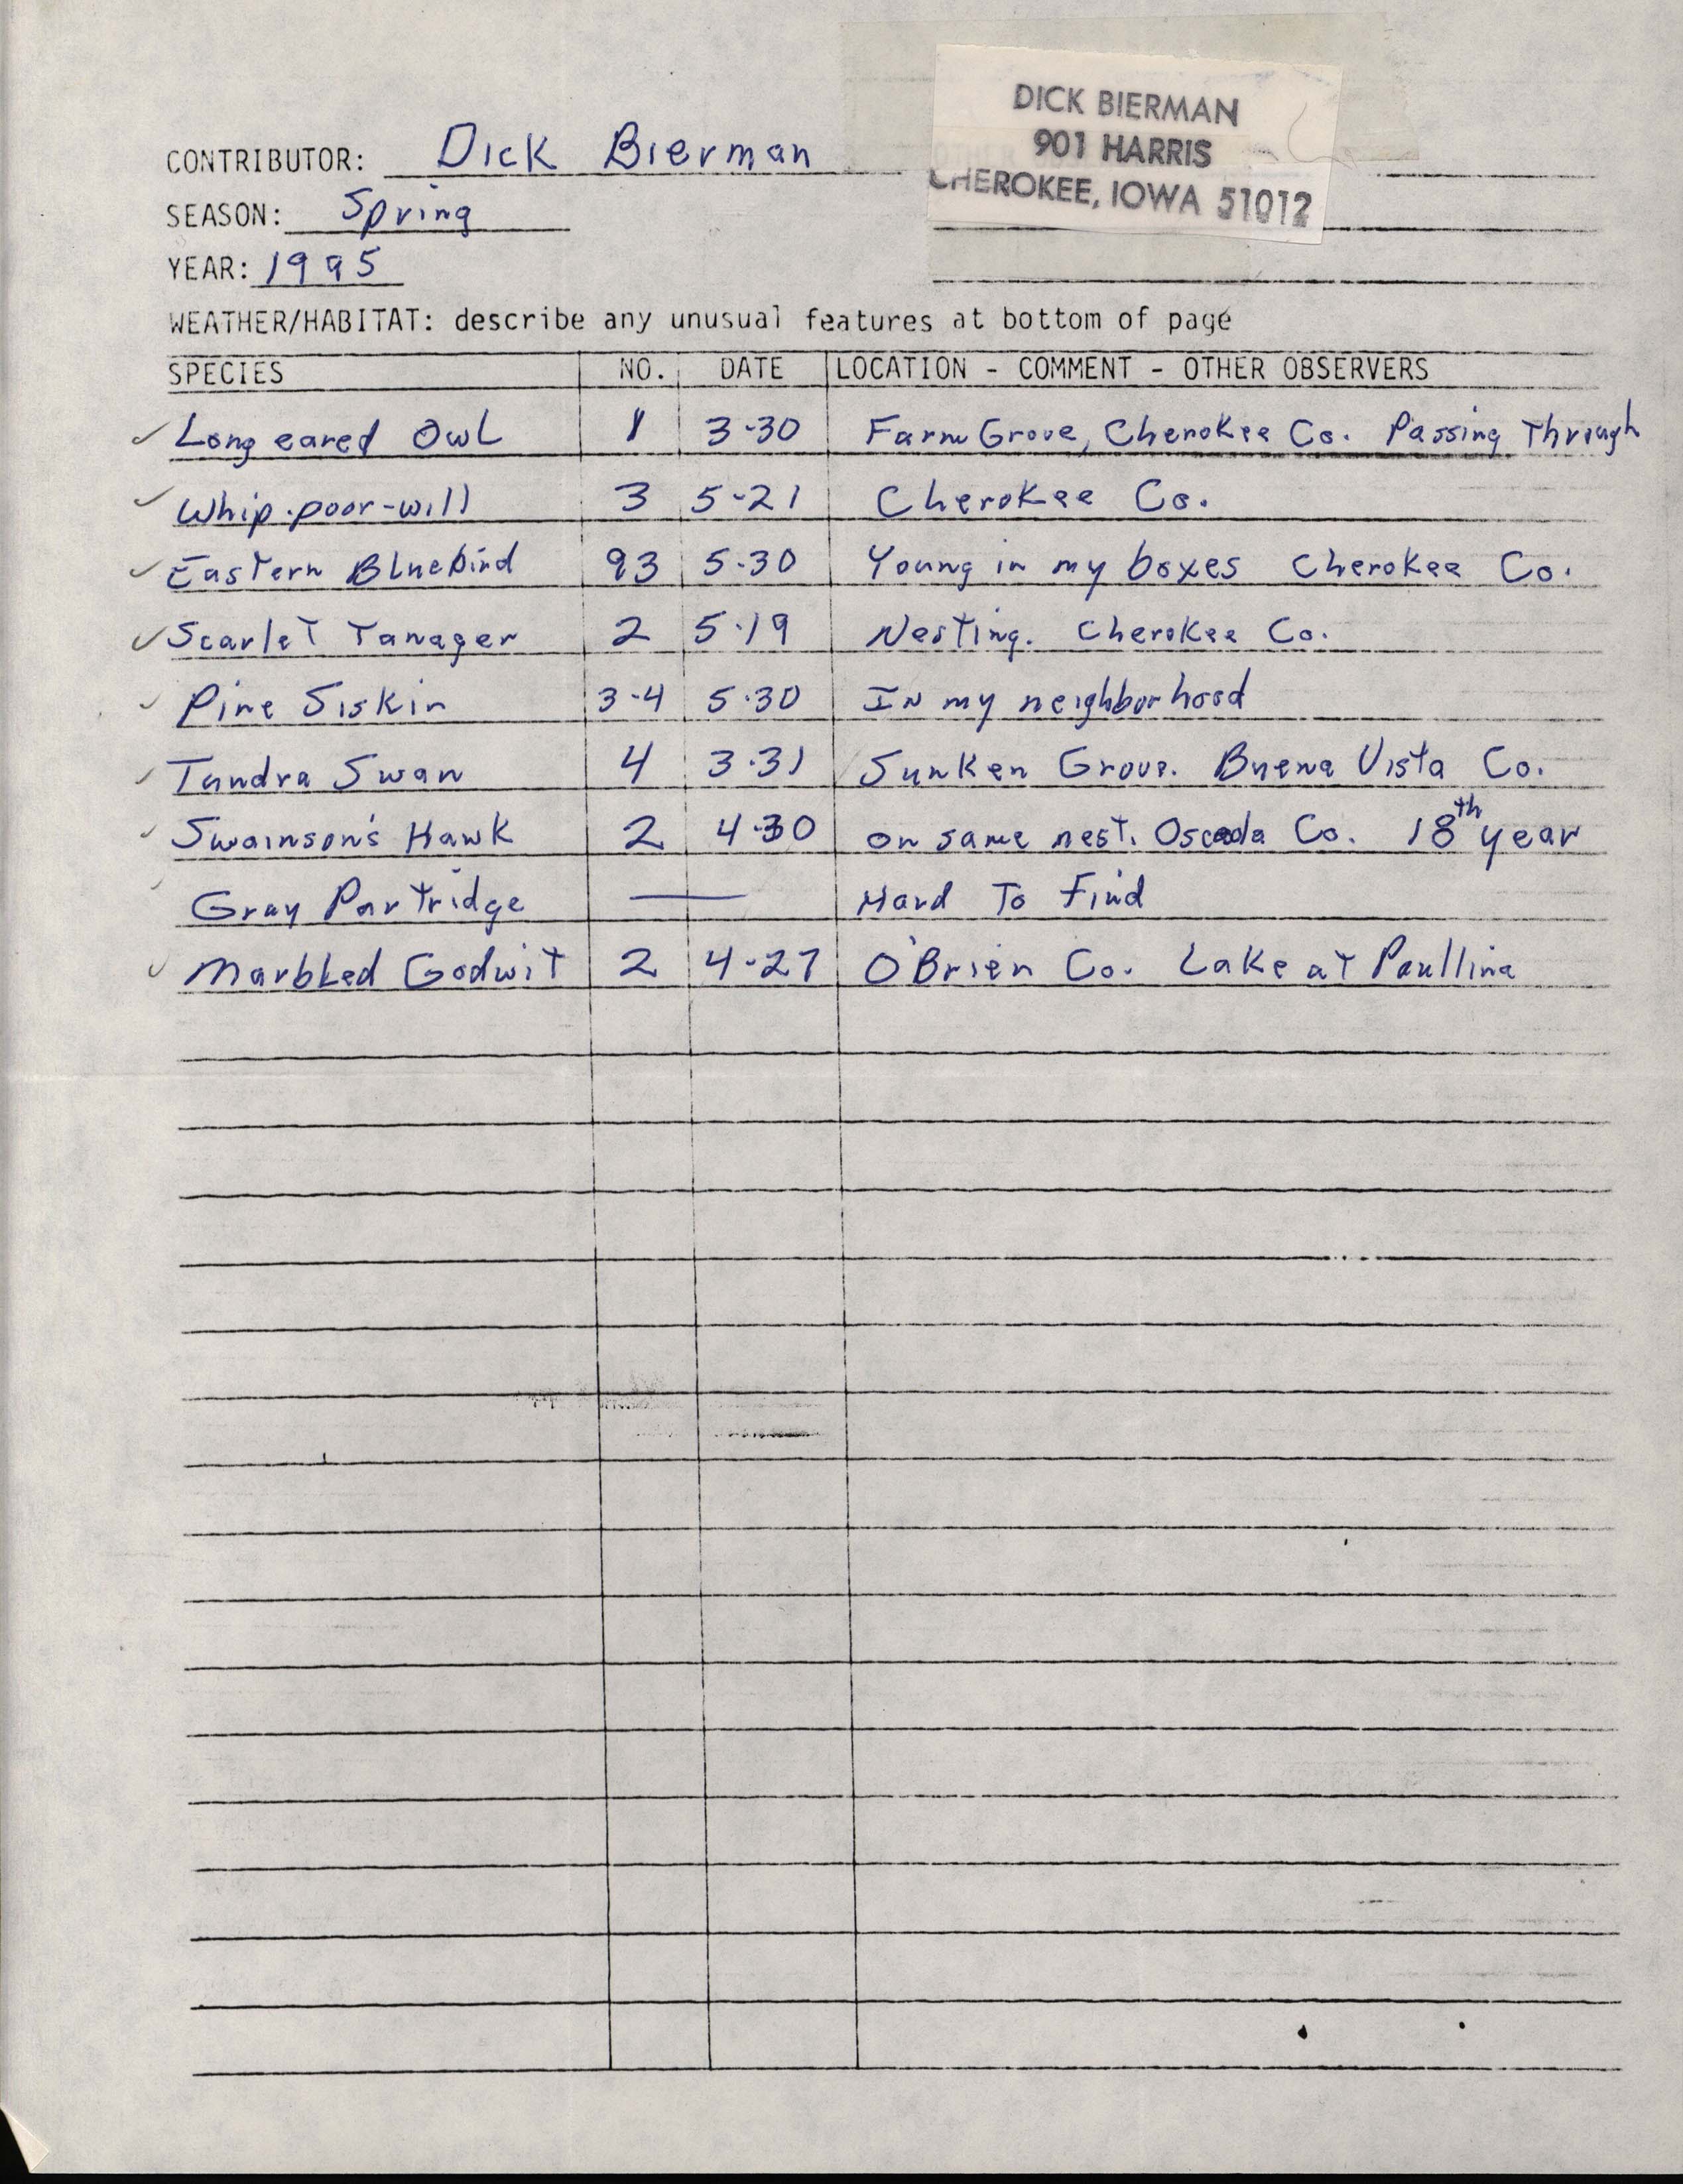 Field reports form for submitting seasonal observations of Iowa birds, spring 1995, Dick Bierman